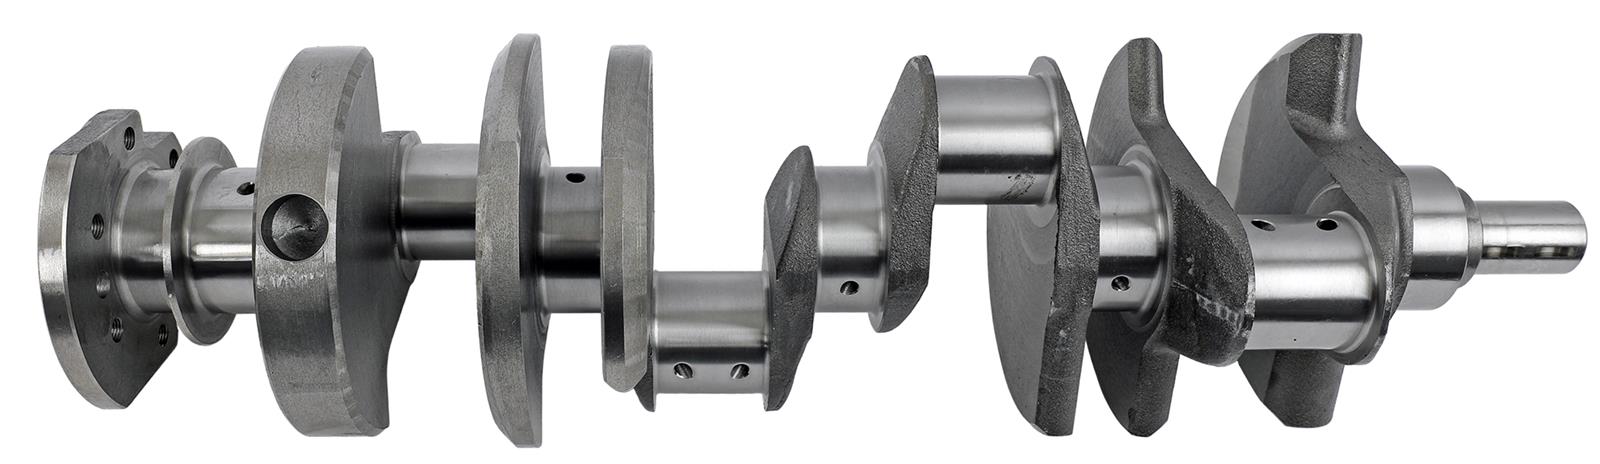 F-43 Series 3.480 Stroke Steel Forged Crankshaft for Small Block Chevy Scat 4-350-3480-5700-20LW 